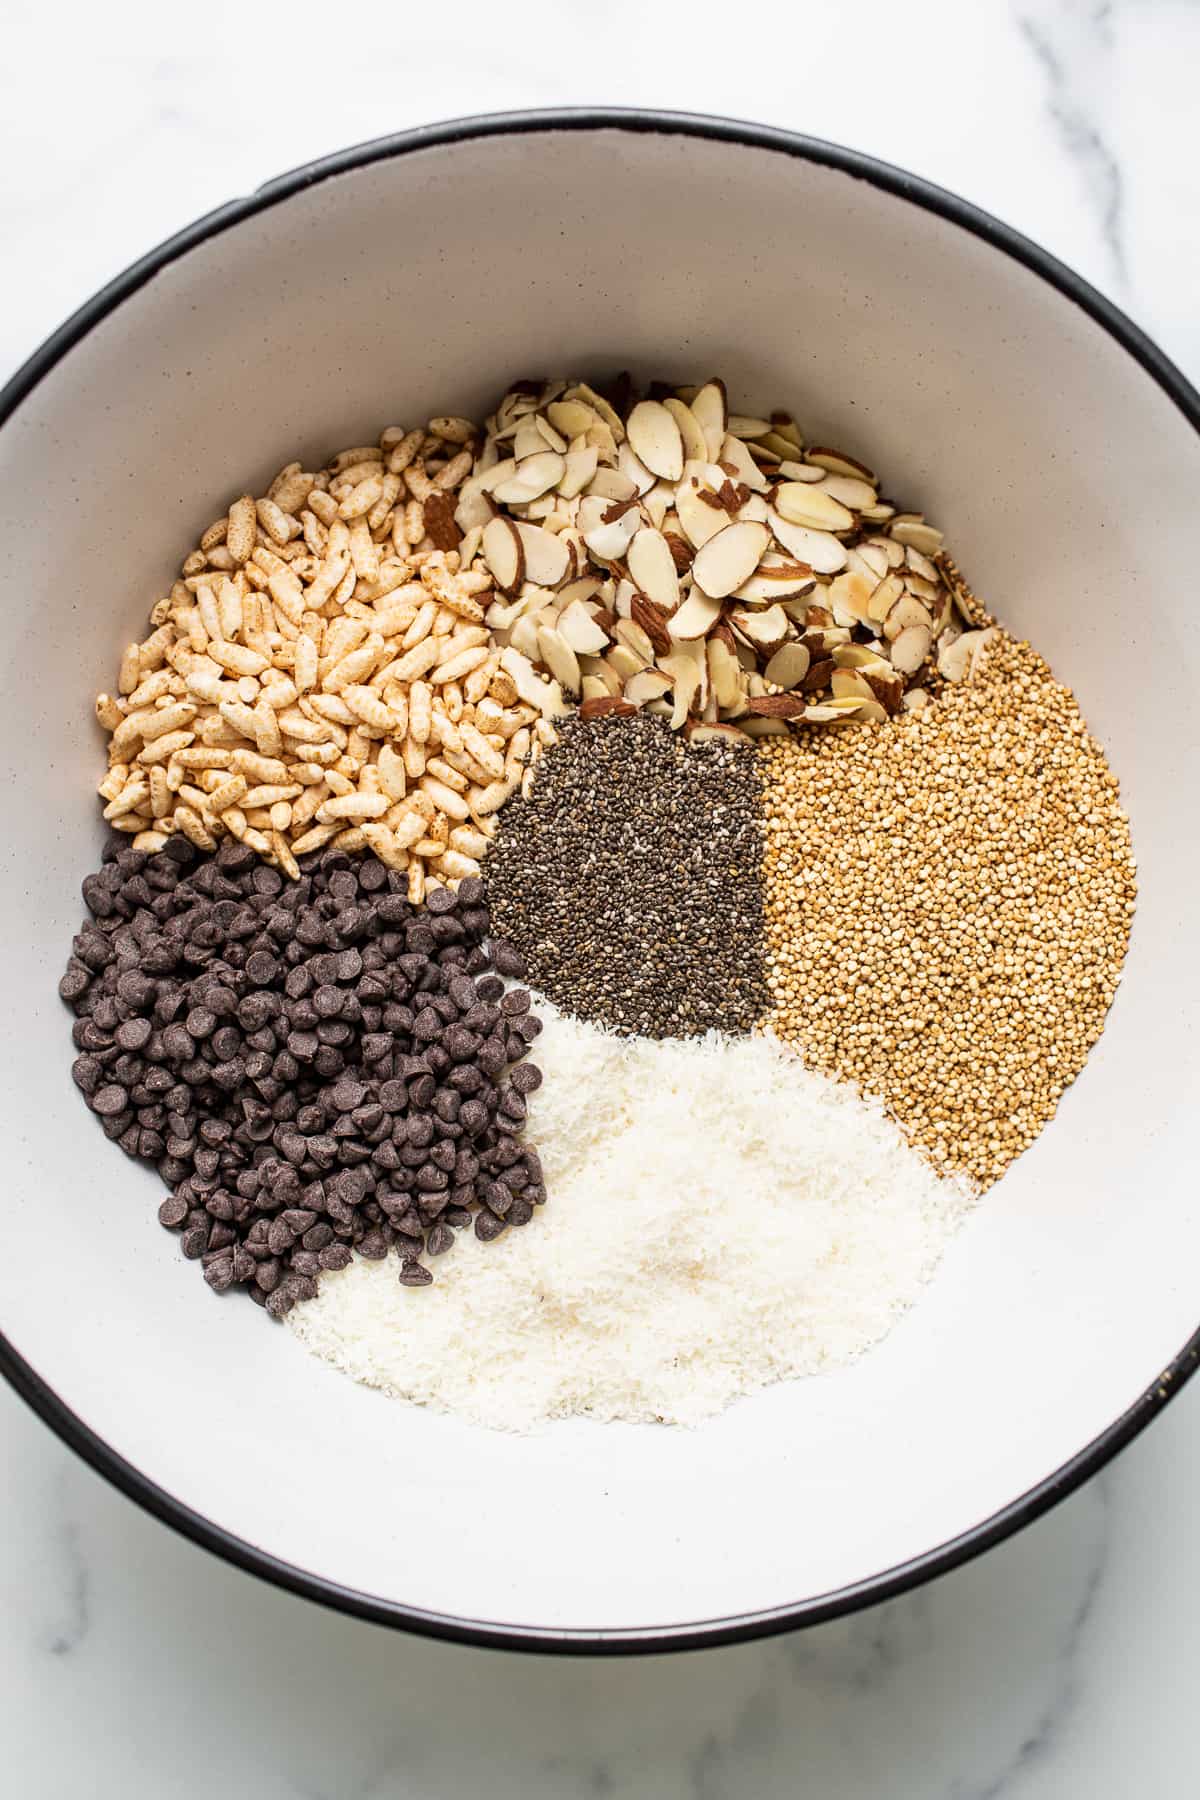 Ingredients for nut and coconut bars in a bowl. 